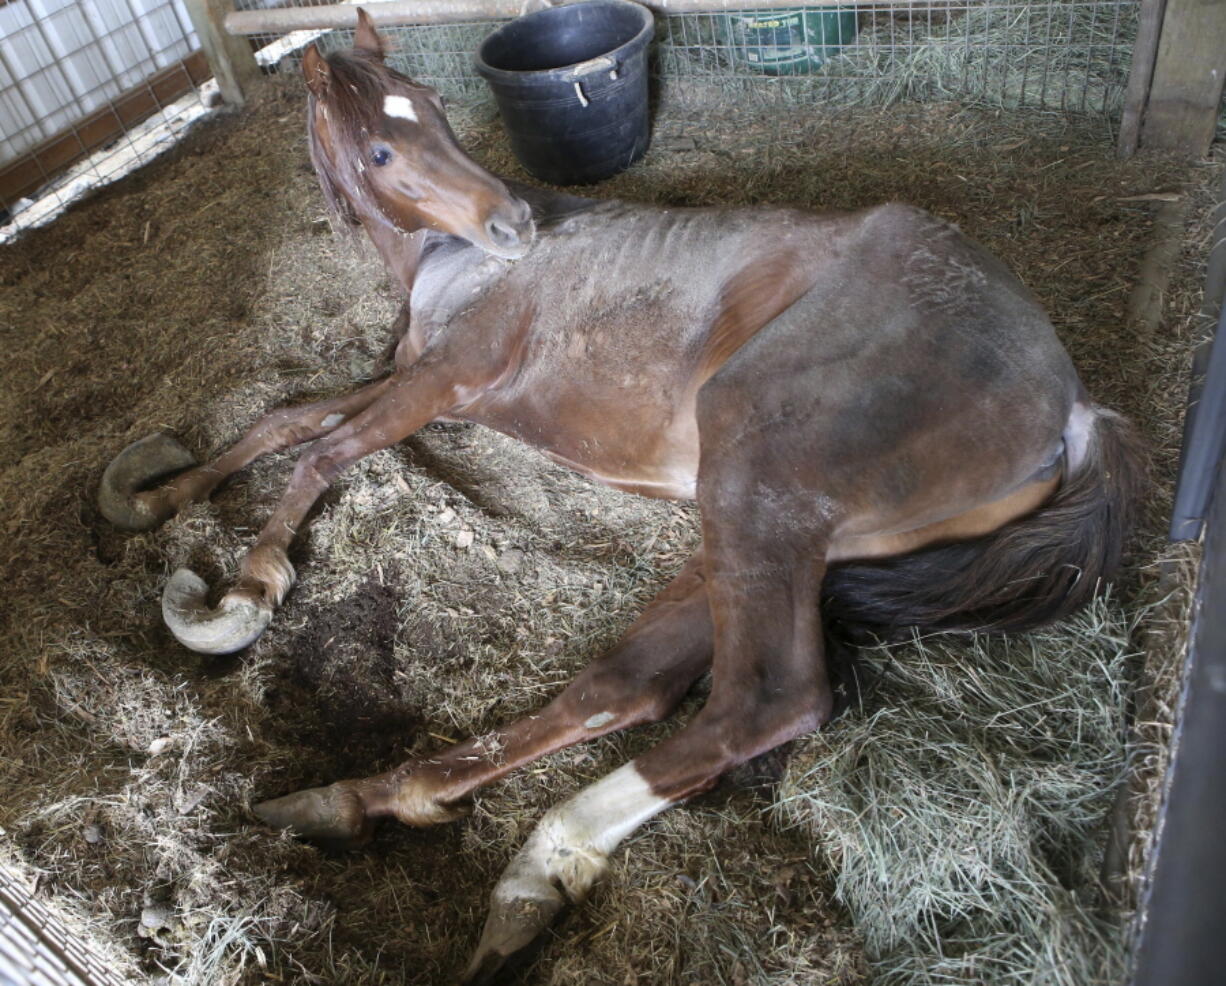 In this March 26, 2018, photo a neglected horse lies in a barn stall while awaiting care from a farrier, at the Deschutes County Livestock Rescue and Shelter in Bend, Ore. Two women have pleaded no contest to 10 counts of animal neglect for failing to care for more than 80 horses on a ranch in Terrebone.